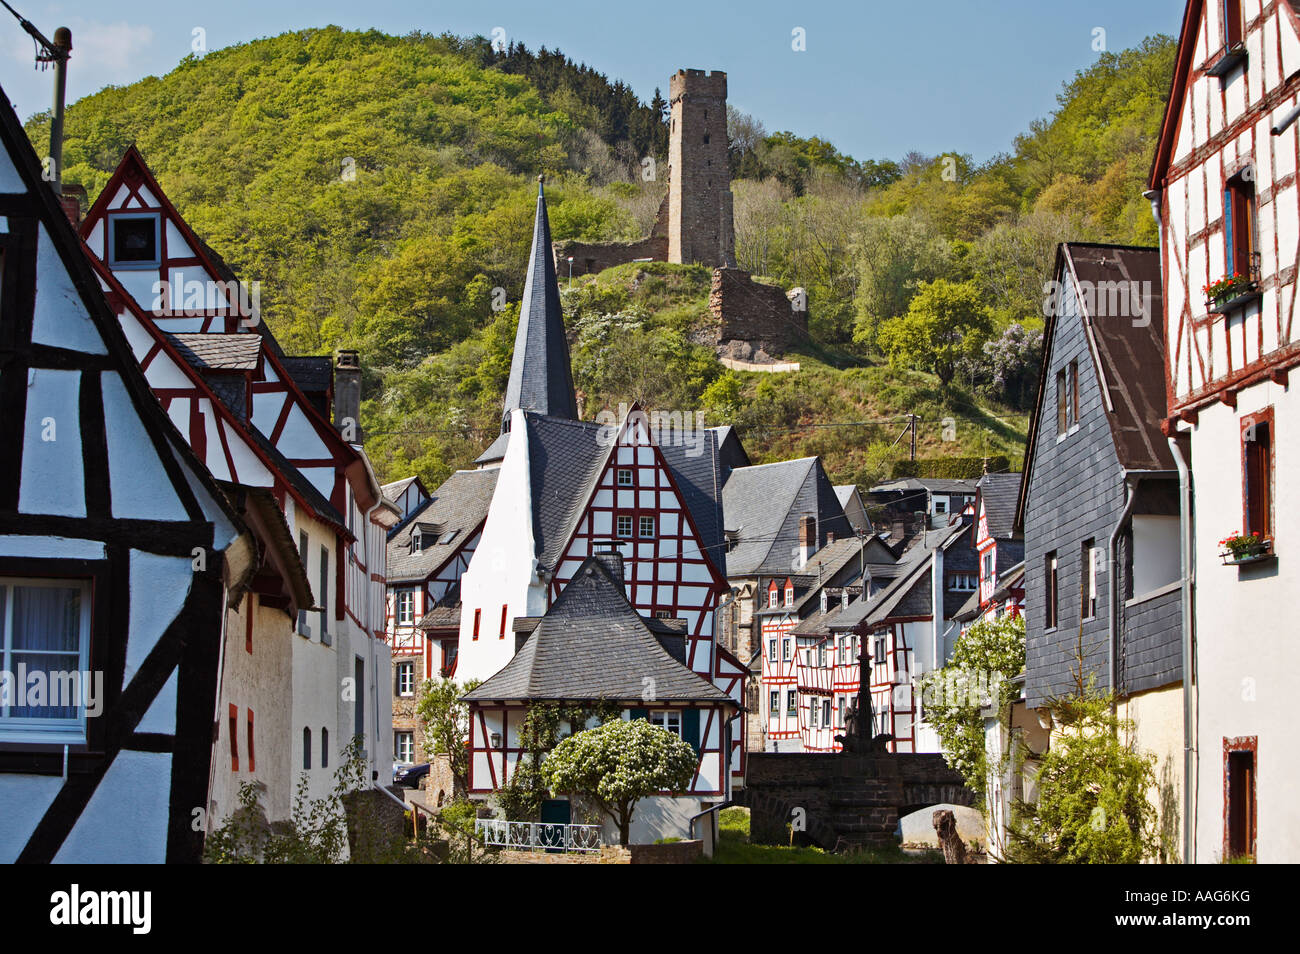 Old village of Monreal with Castle Resch above, Eifel Region, Germany, Europe Stock Photo